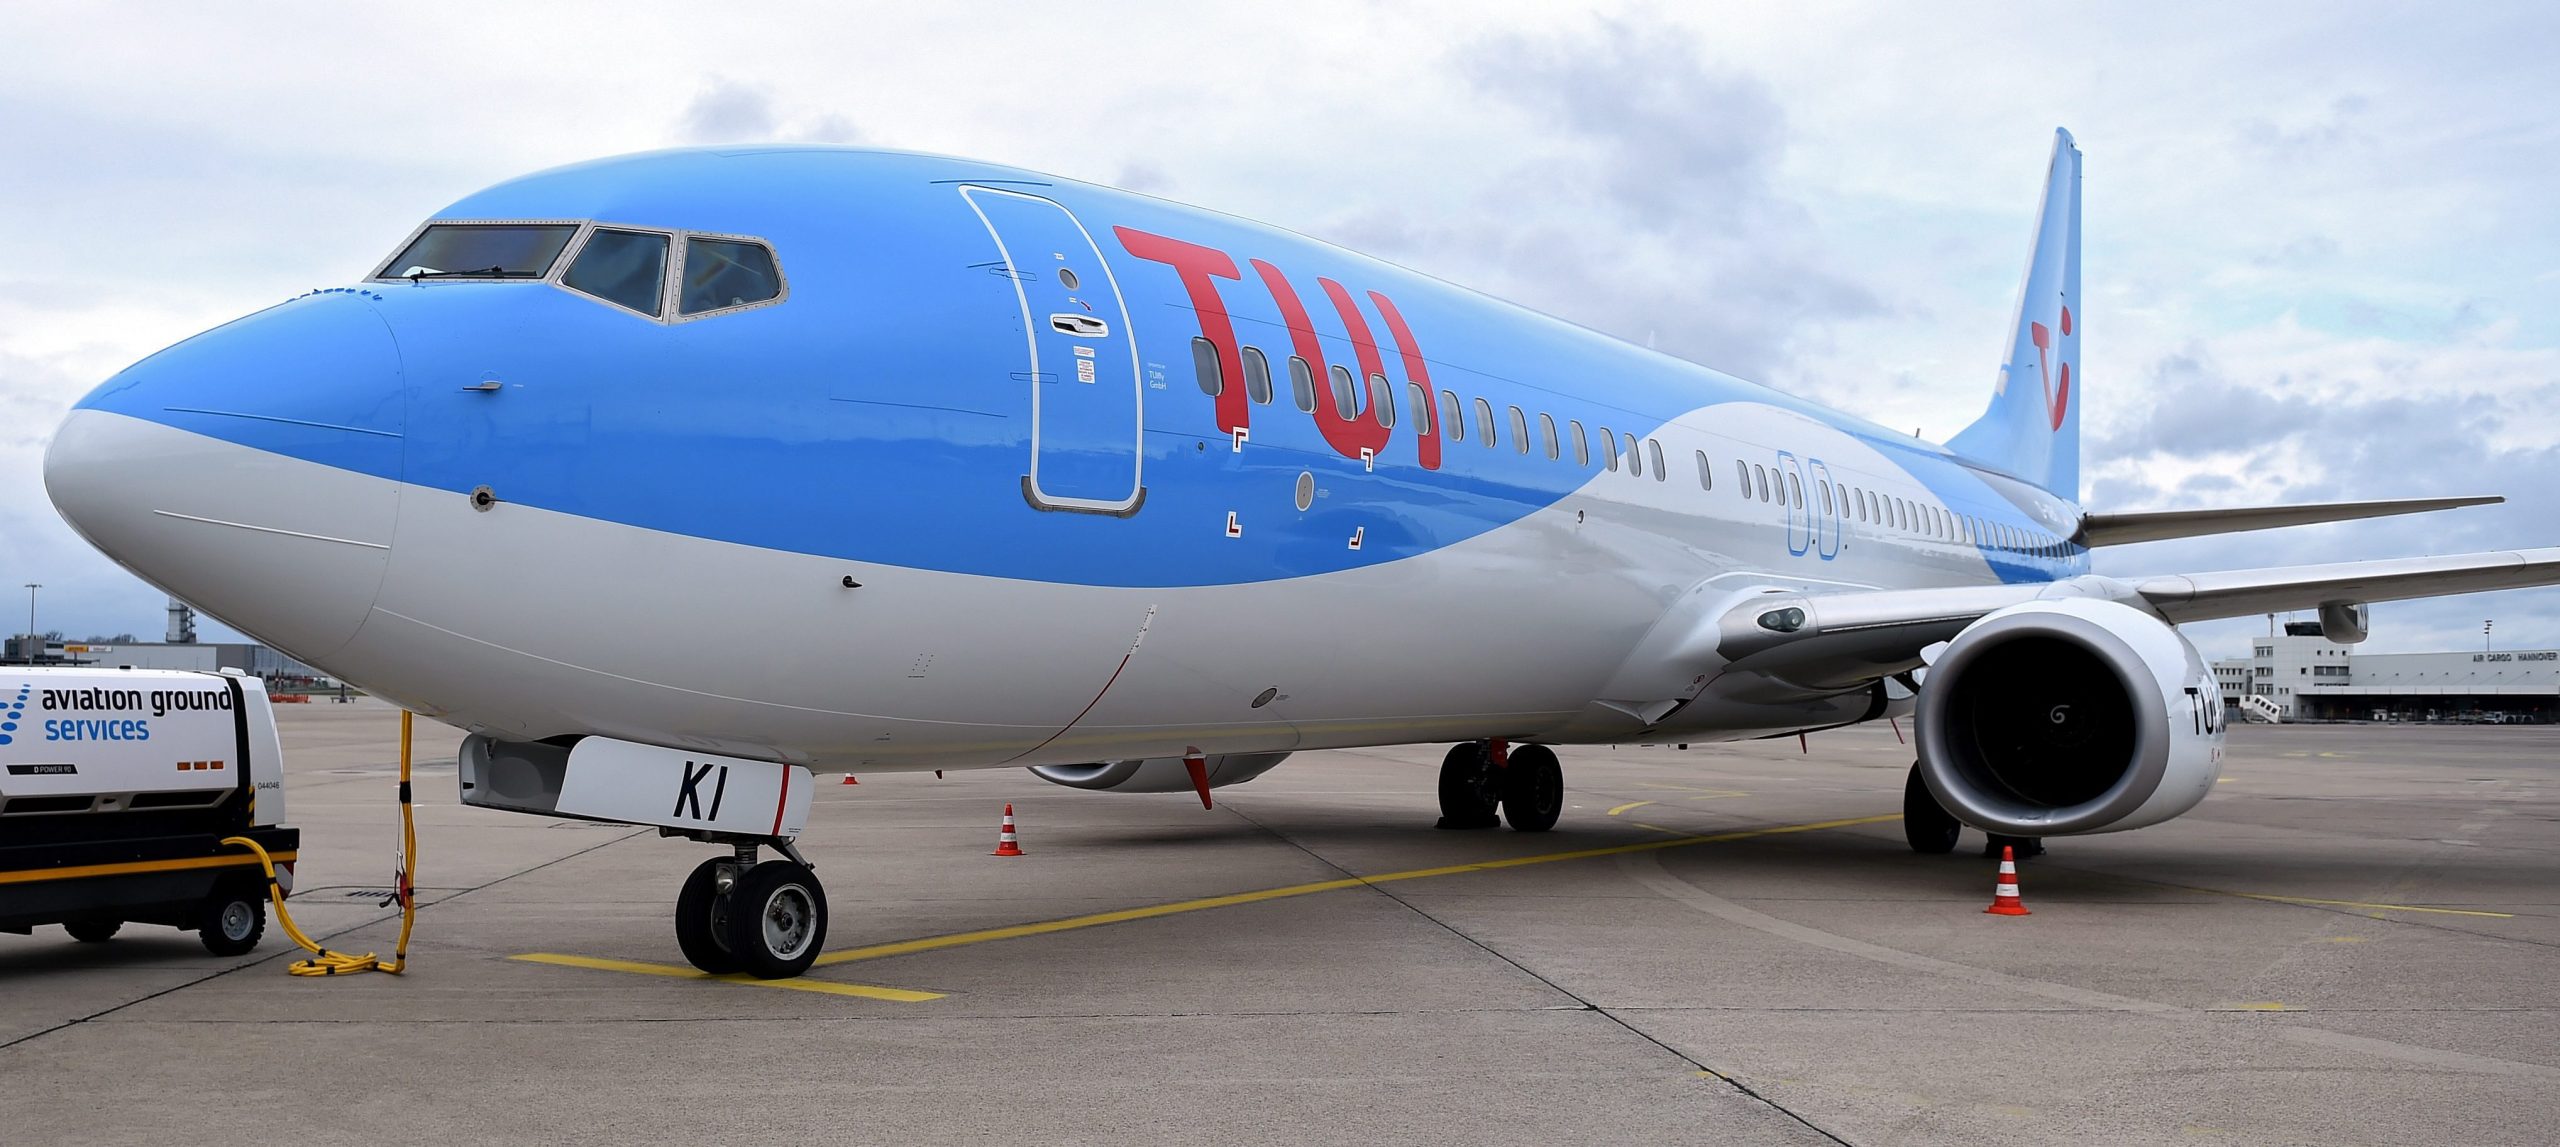 TUI Fly will transport 3 million European tourists to Greece this year – Added 60 flights in April